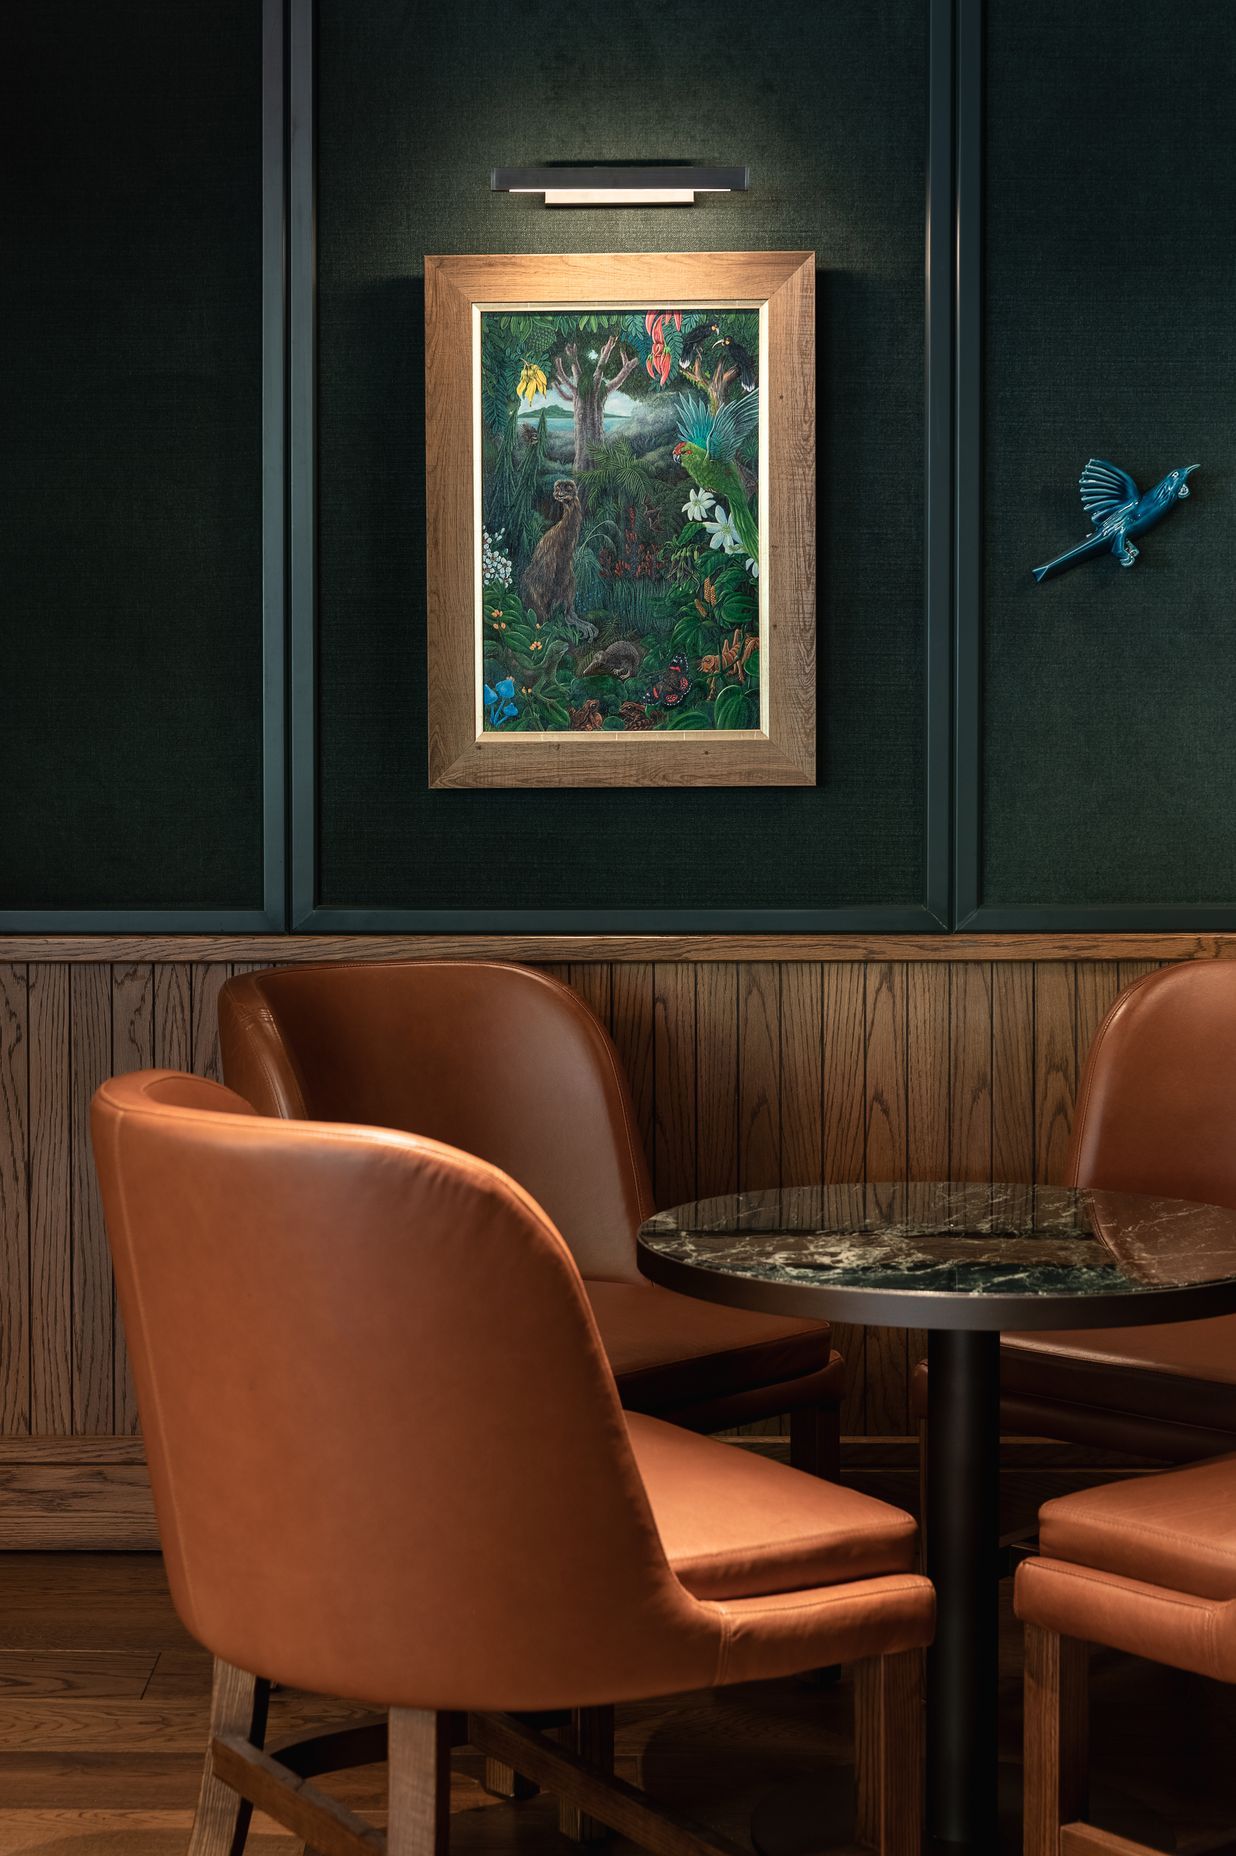 Timber paneling in the bar offers a traditional and grounding feeling.